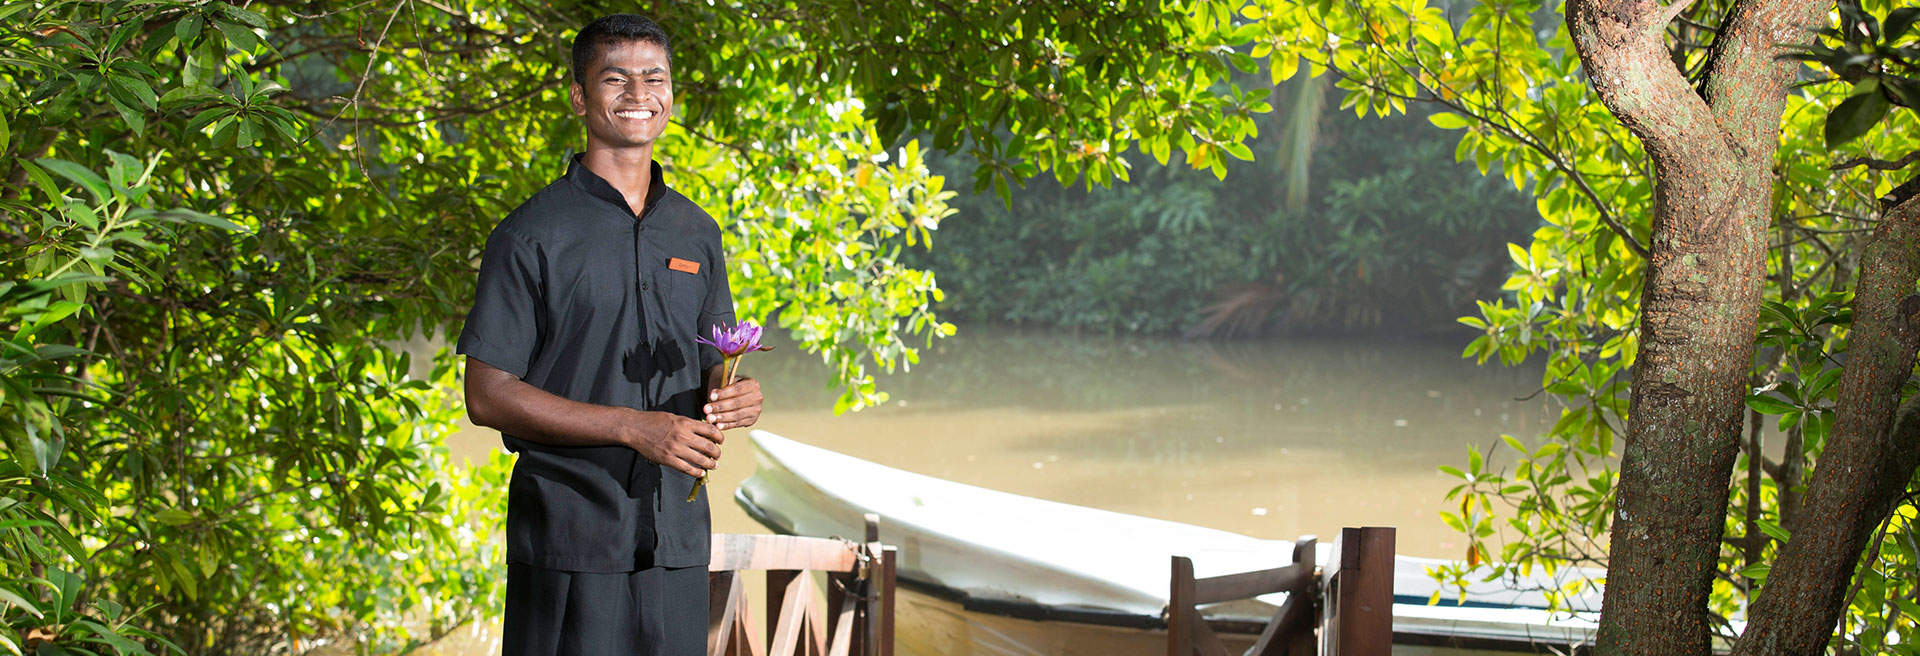 waiter standing by a boat